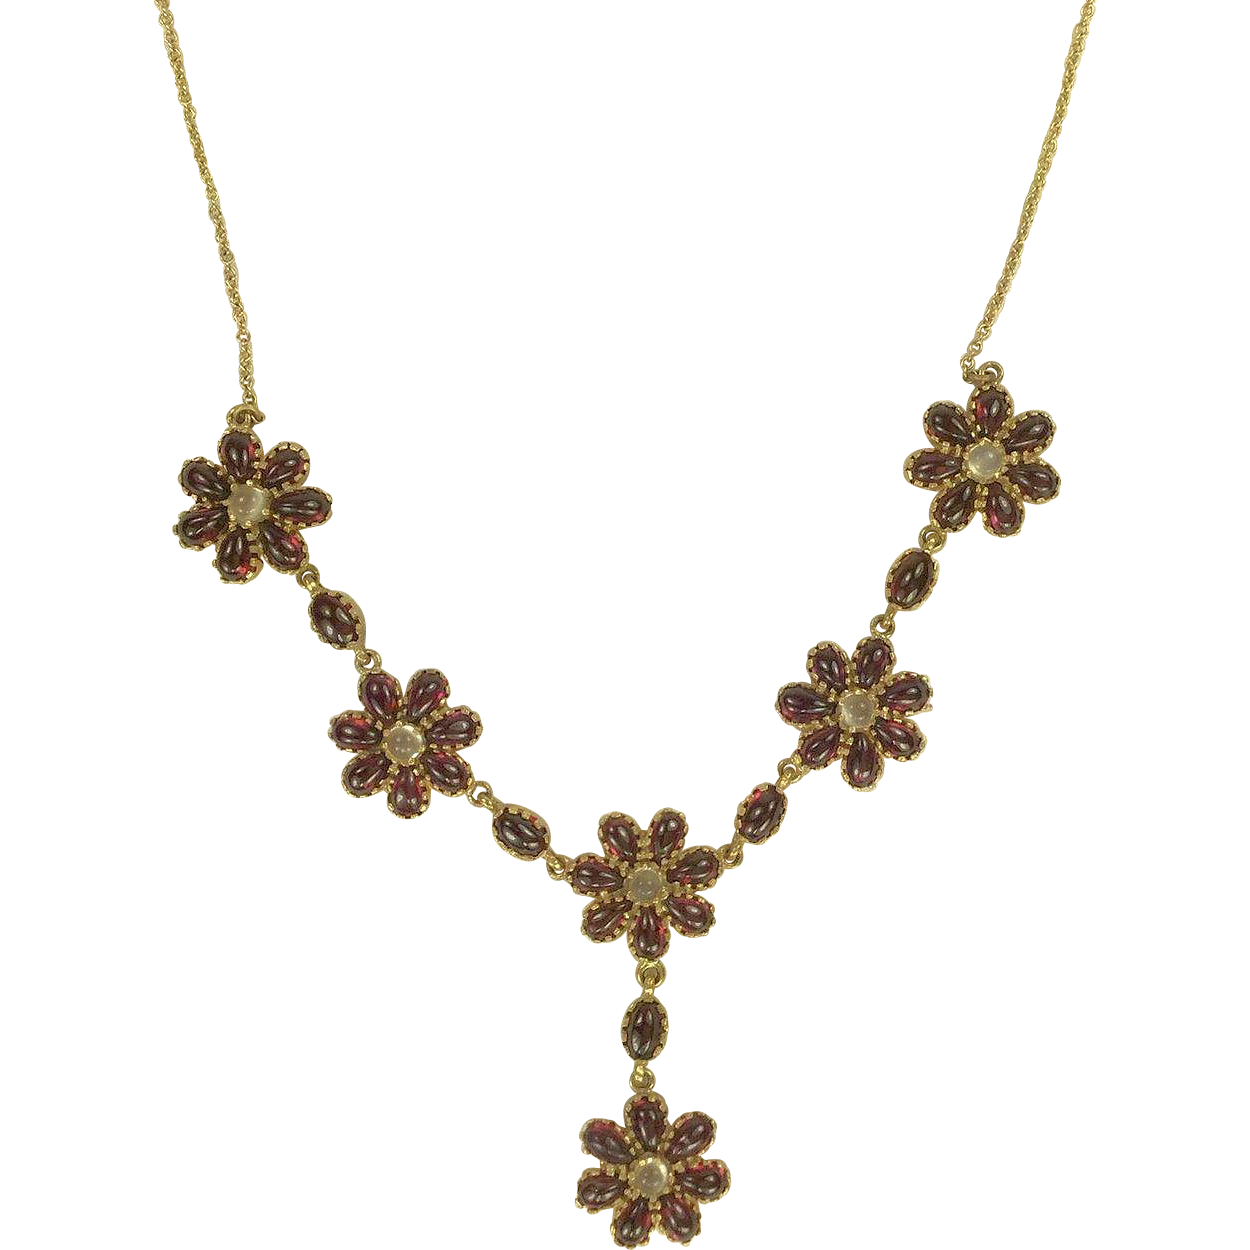 Victorian Style Garnet and Moonstone Necklace. from whiteoaks on Ruby Lane